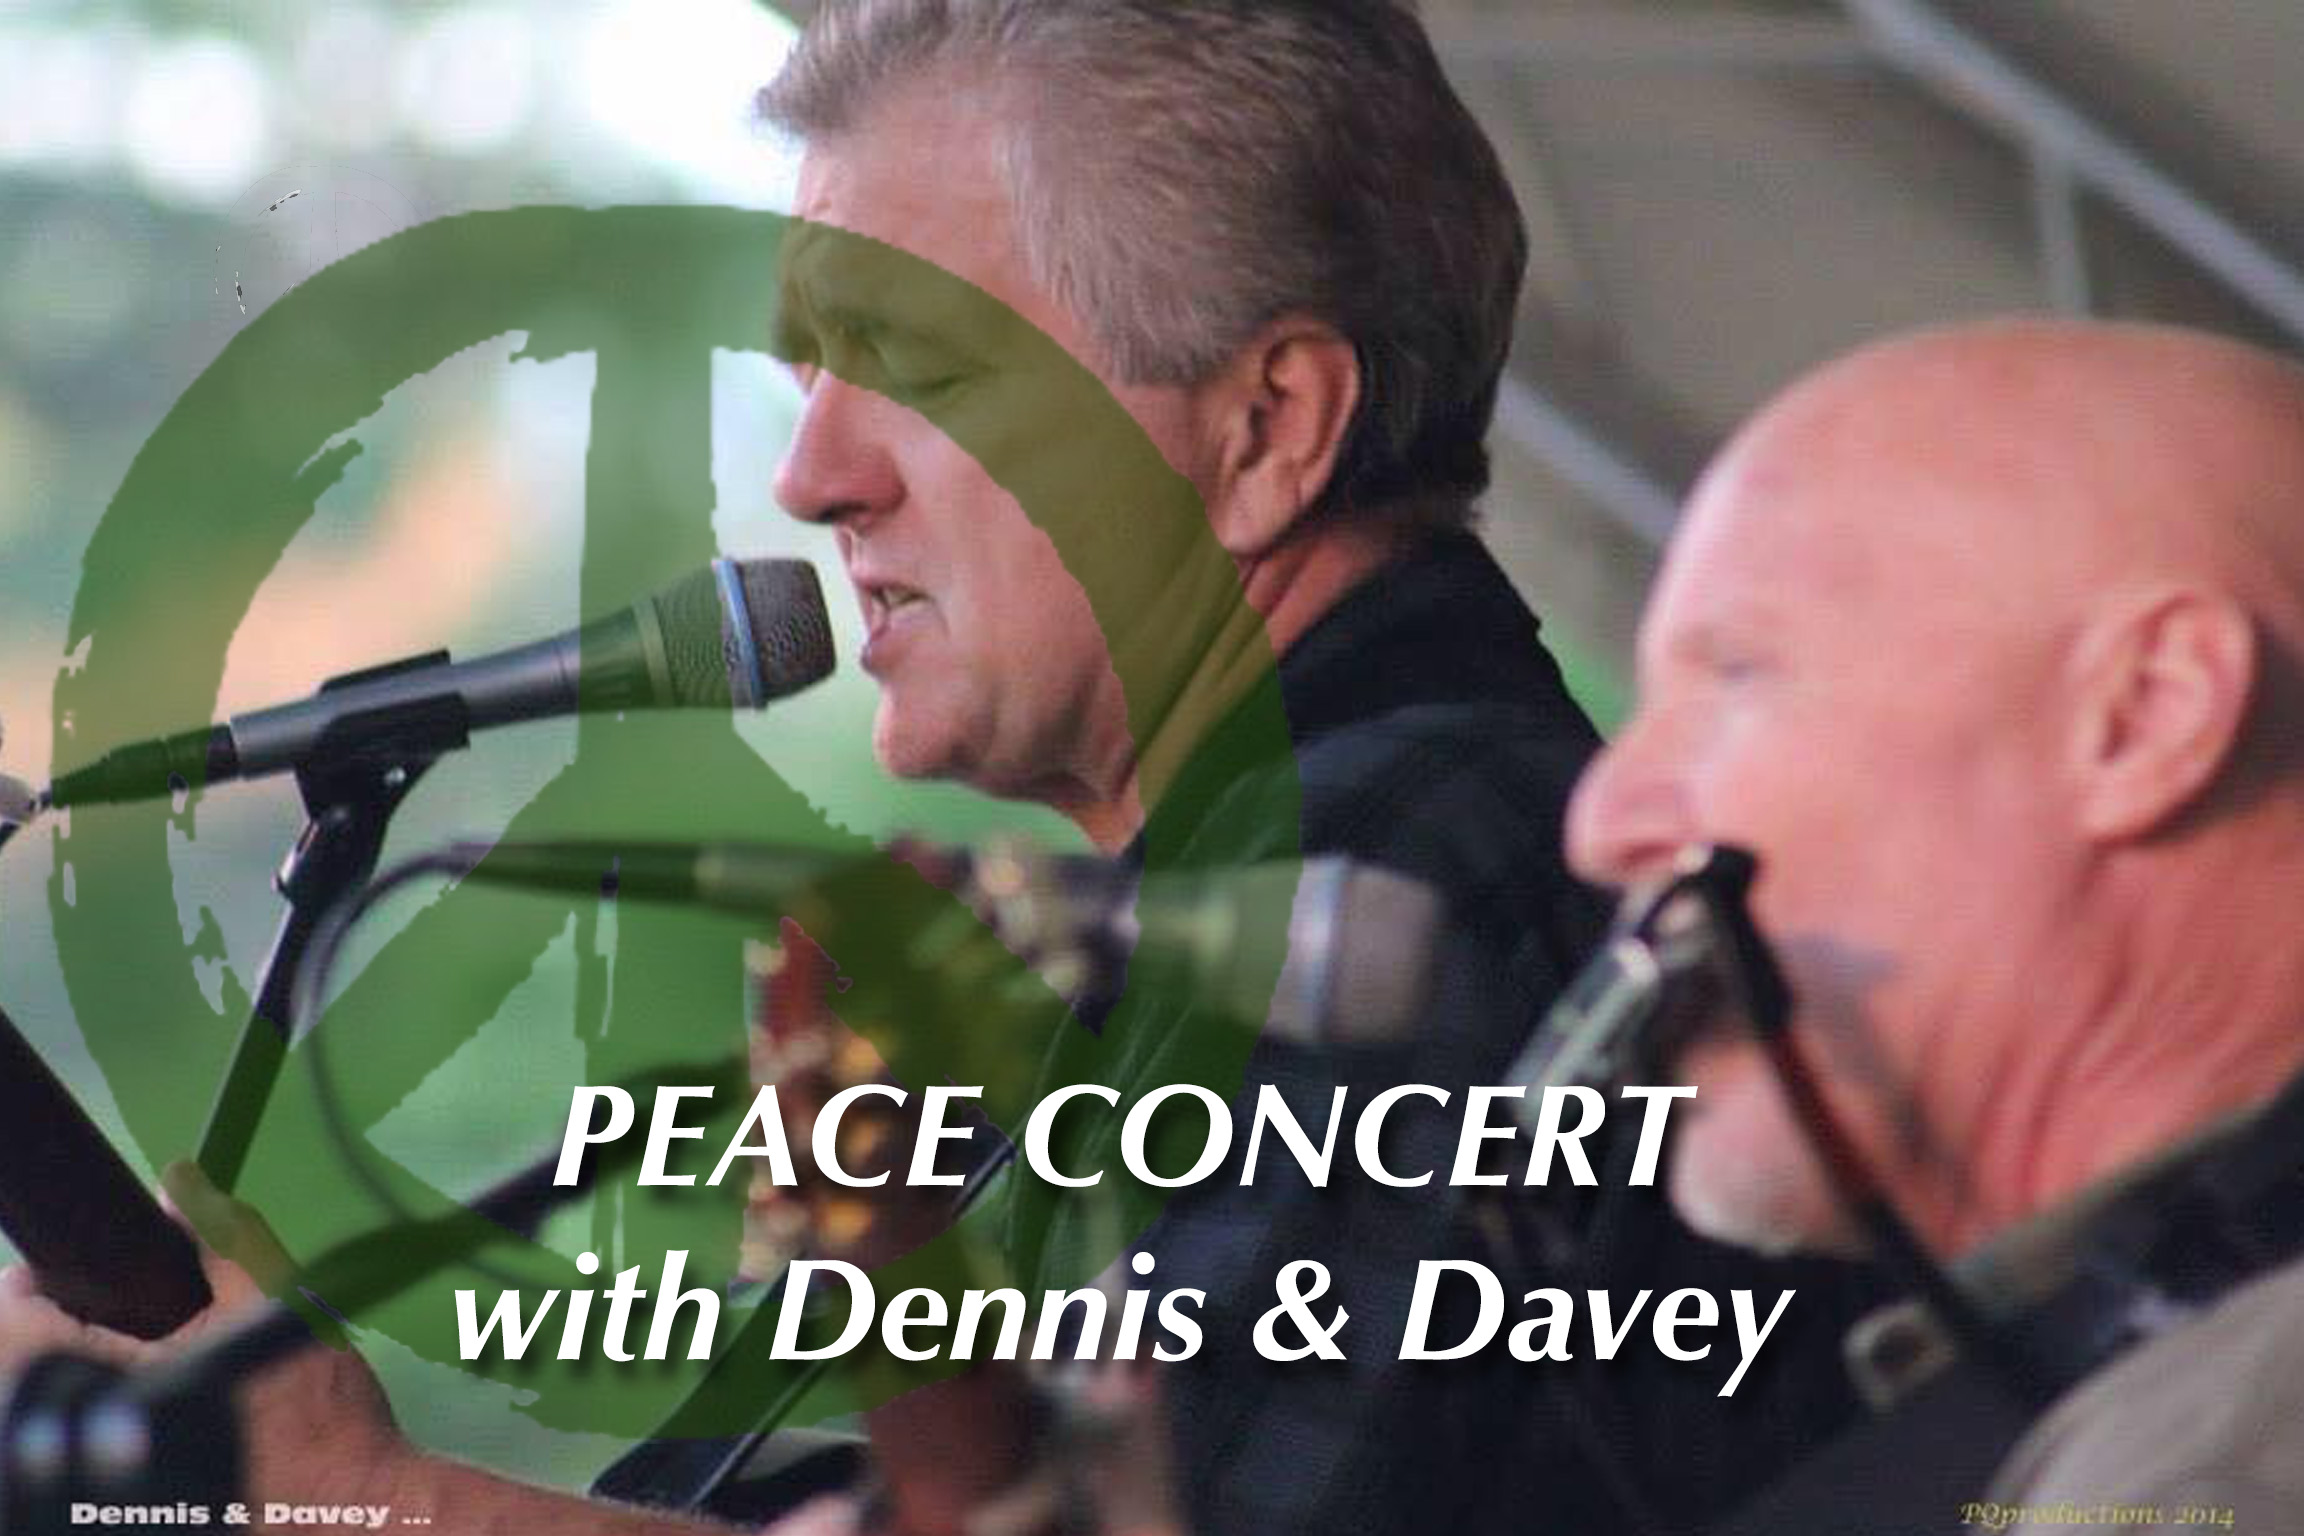 PEACE CONCERT with Dennis & Davey